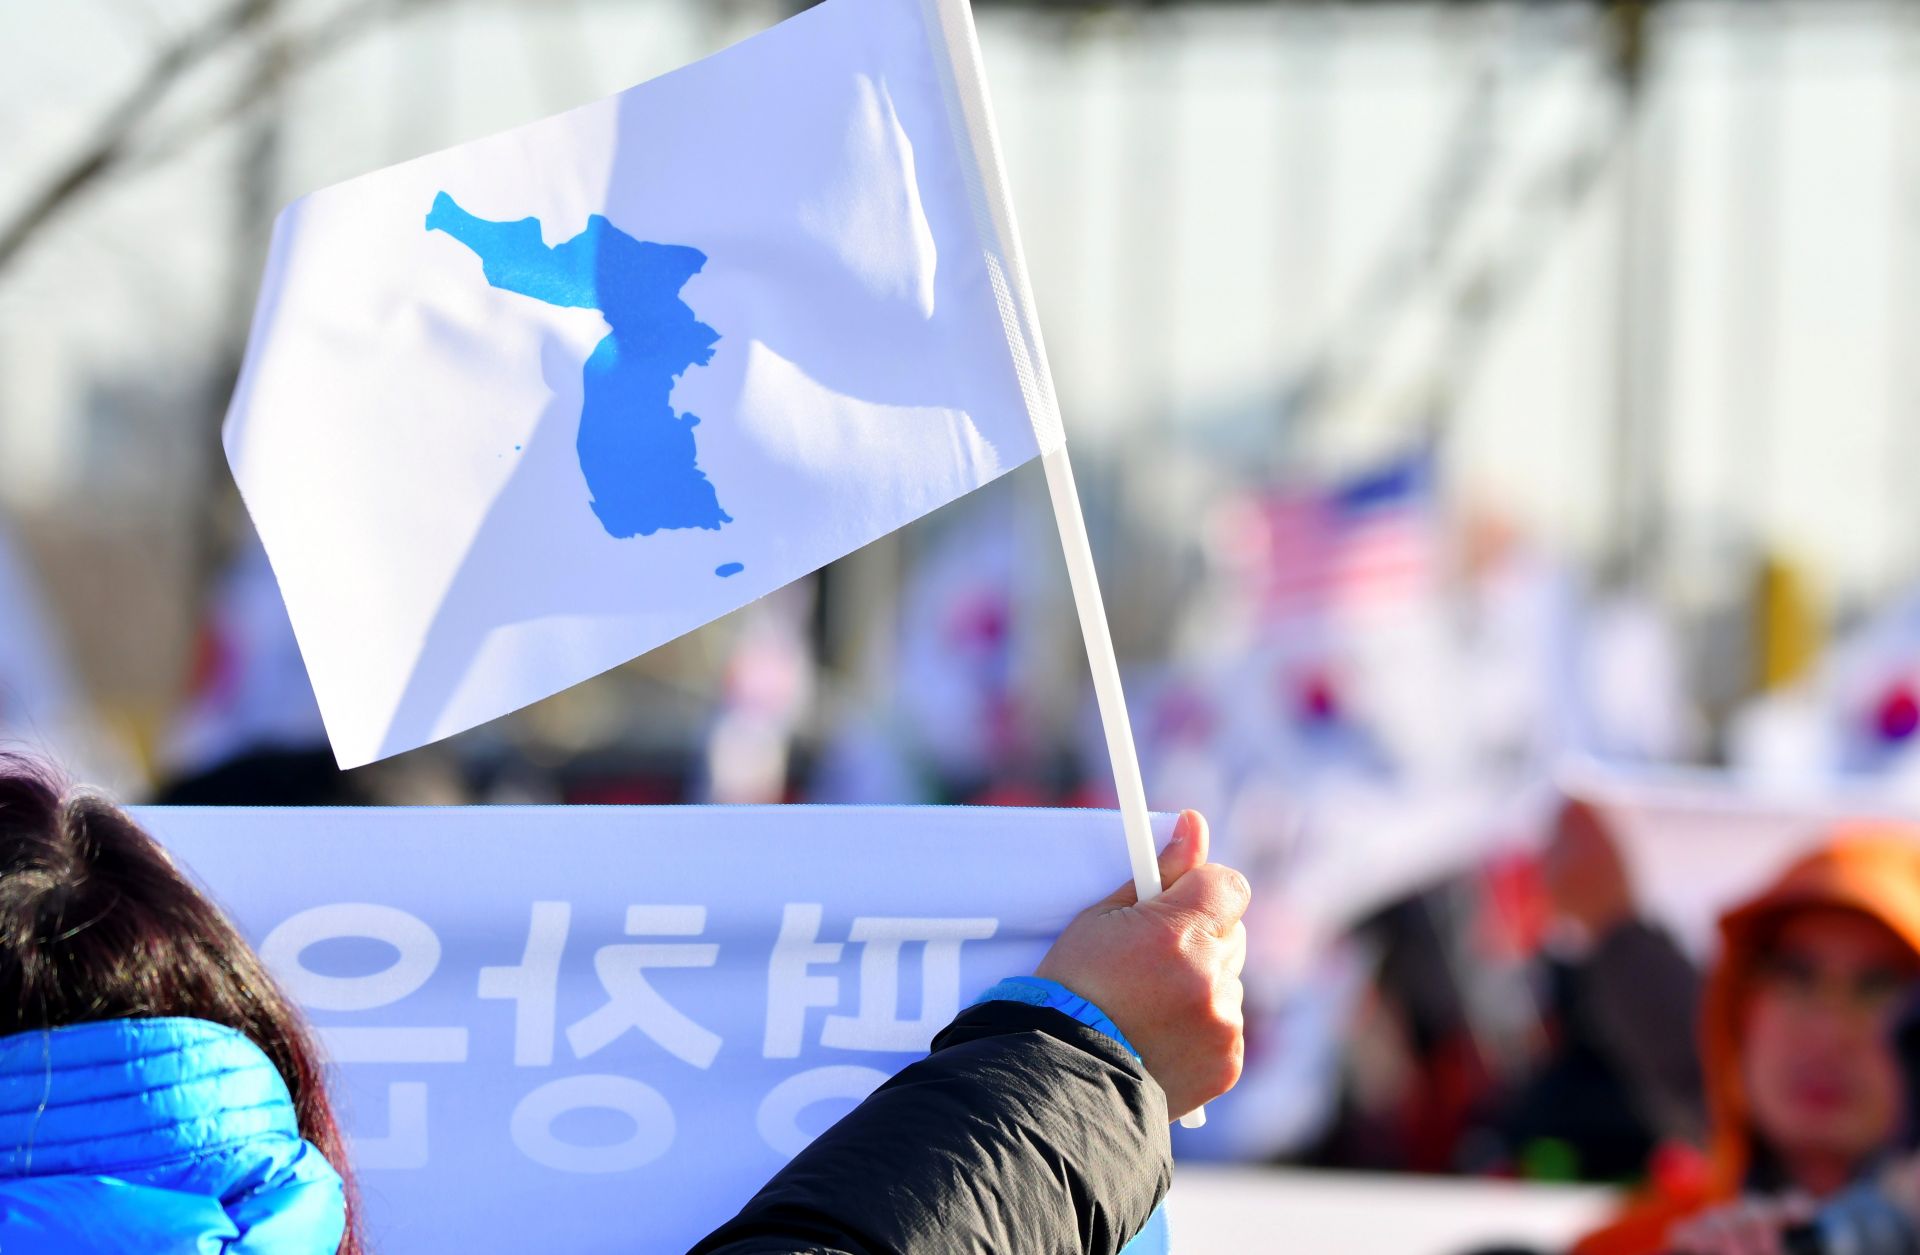 The unofficial 'Unification Flag' representing both North and South Korea became a symbol of the warming ties between the two countries during the Pyeongchang Olympics.